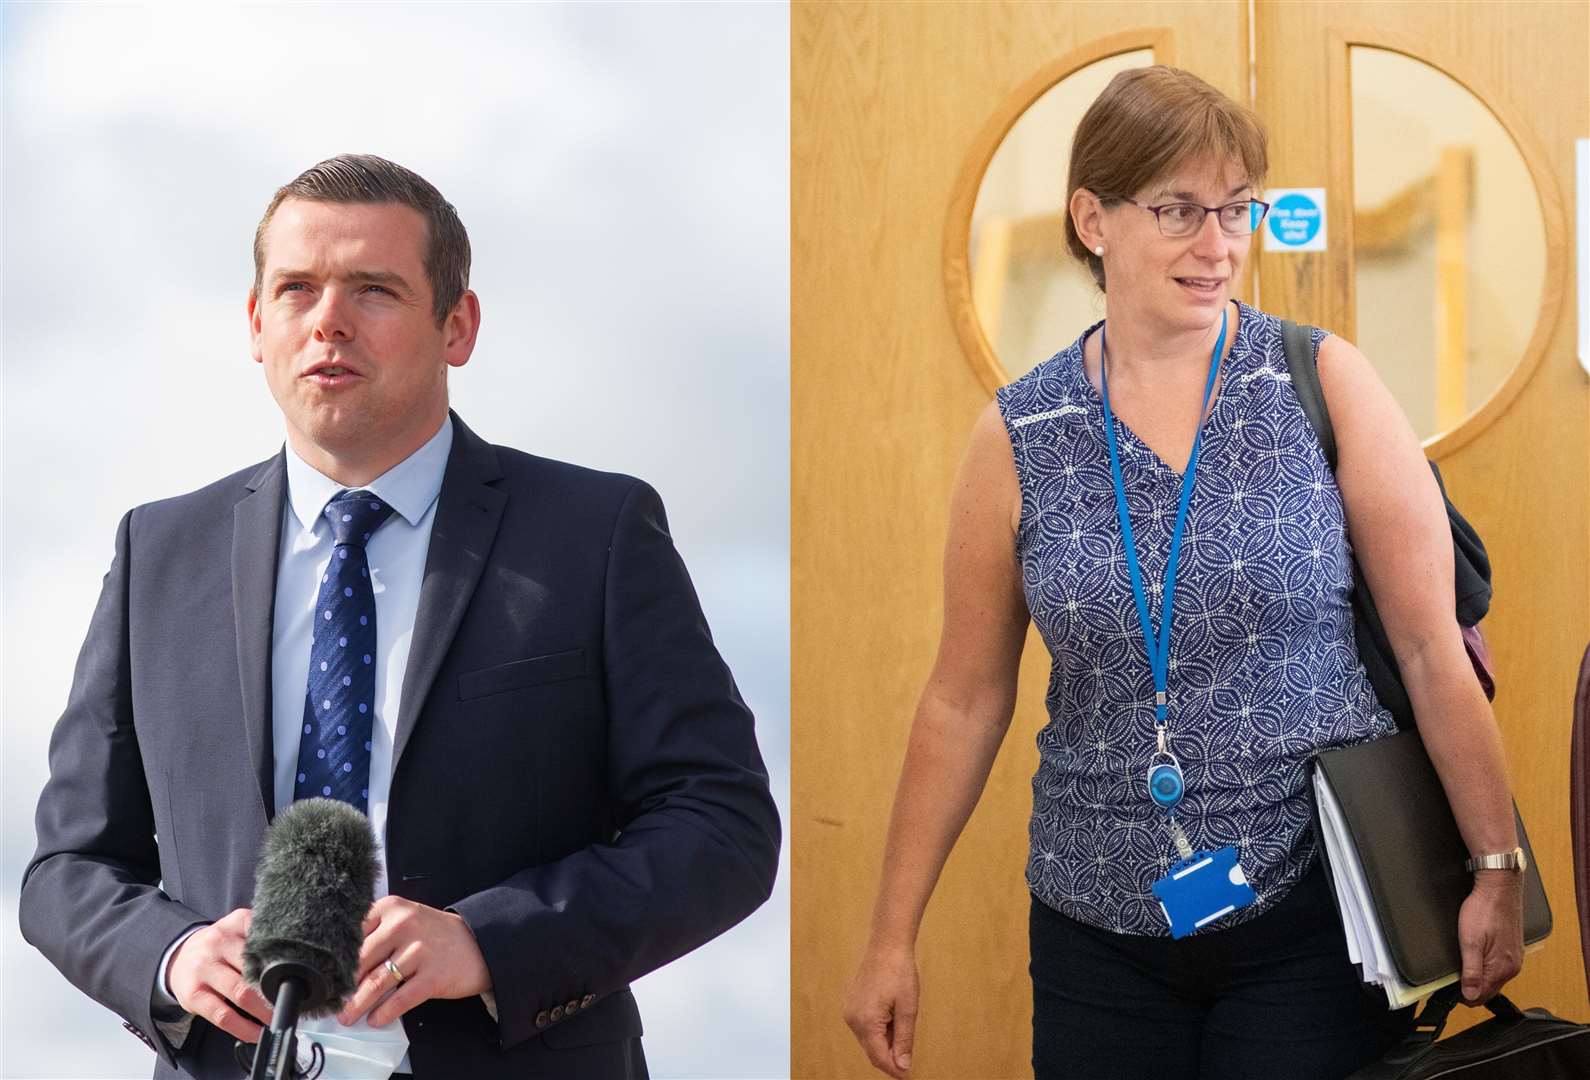 Moray MSP Douglas Ross and Moray Council Leader Kathleen Robertson said that the bid's failure was disappointing news for the region.